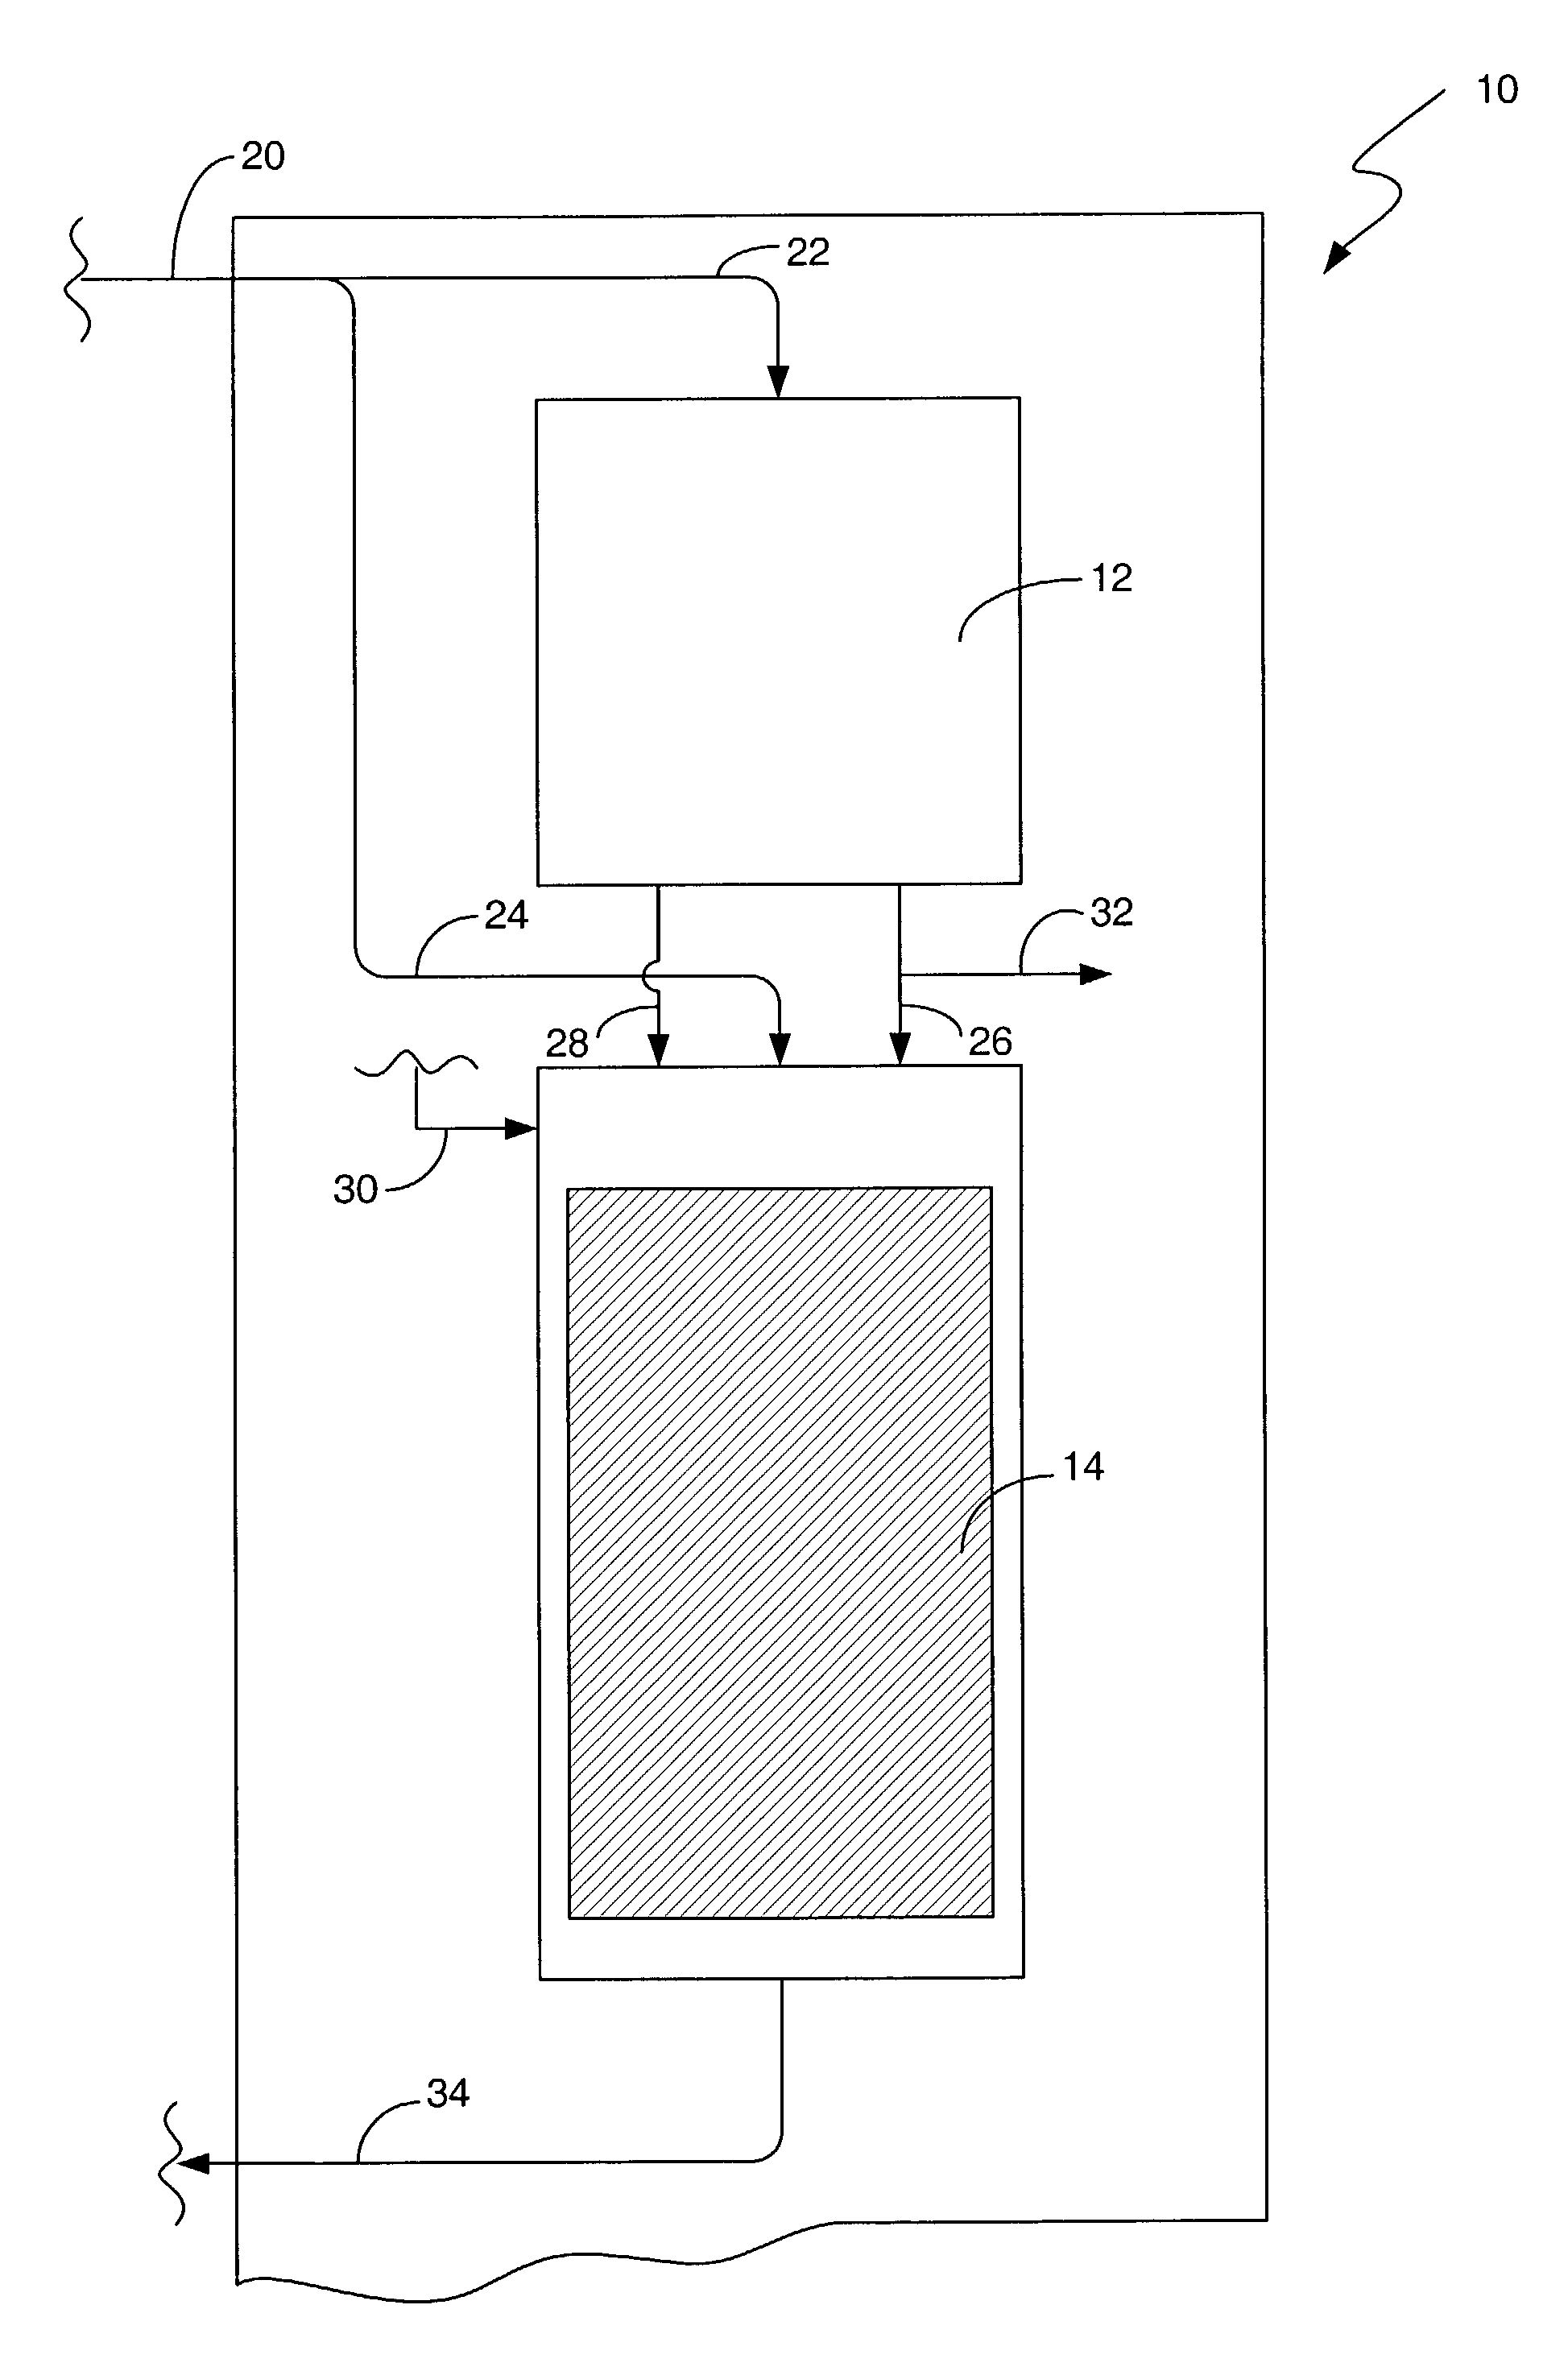 Apparatus and process for the synthesis of hydrogen peroxide directly from hydrogen and oxygen